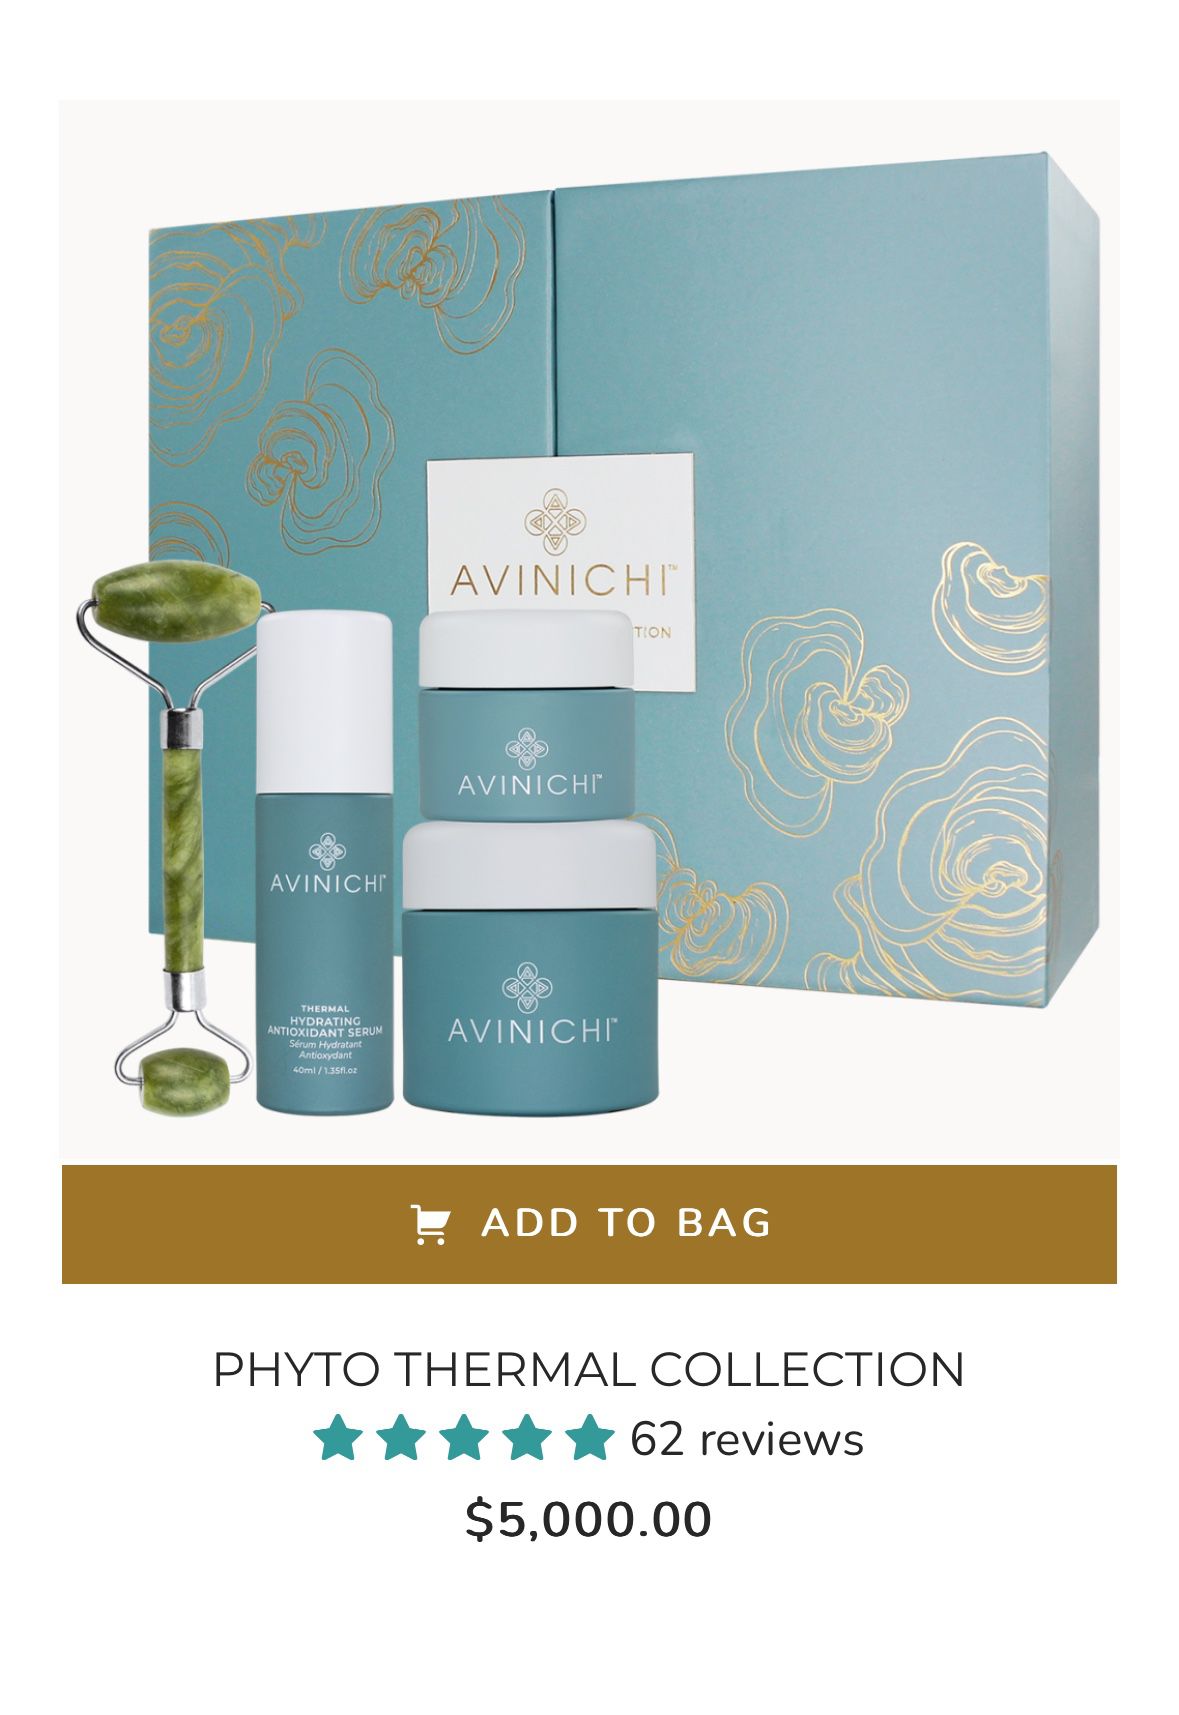 Avinichi Phyto Thermal Collection